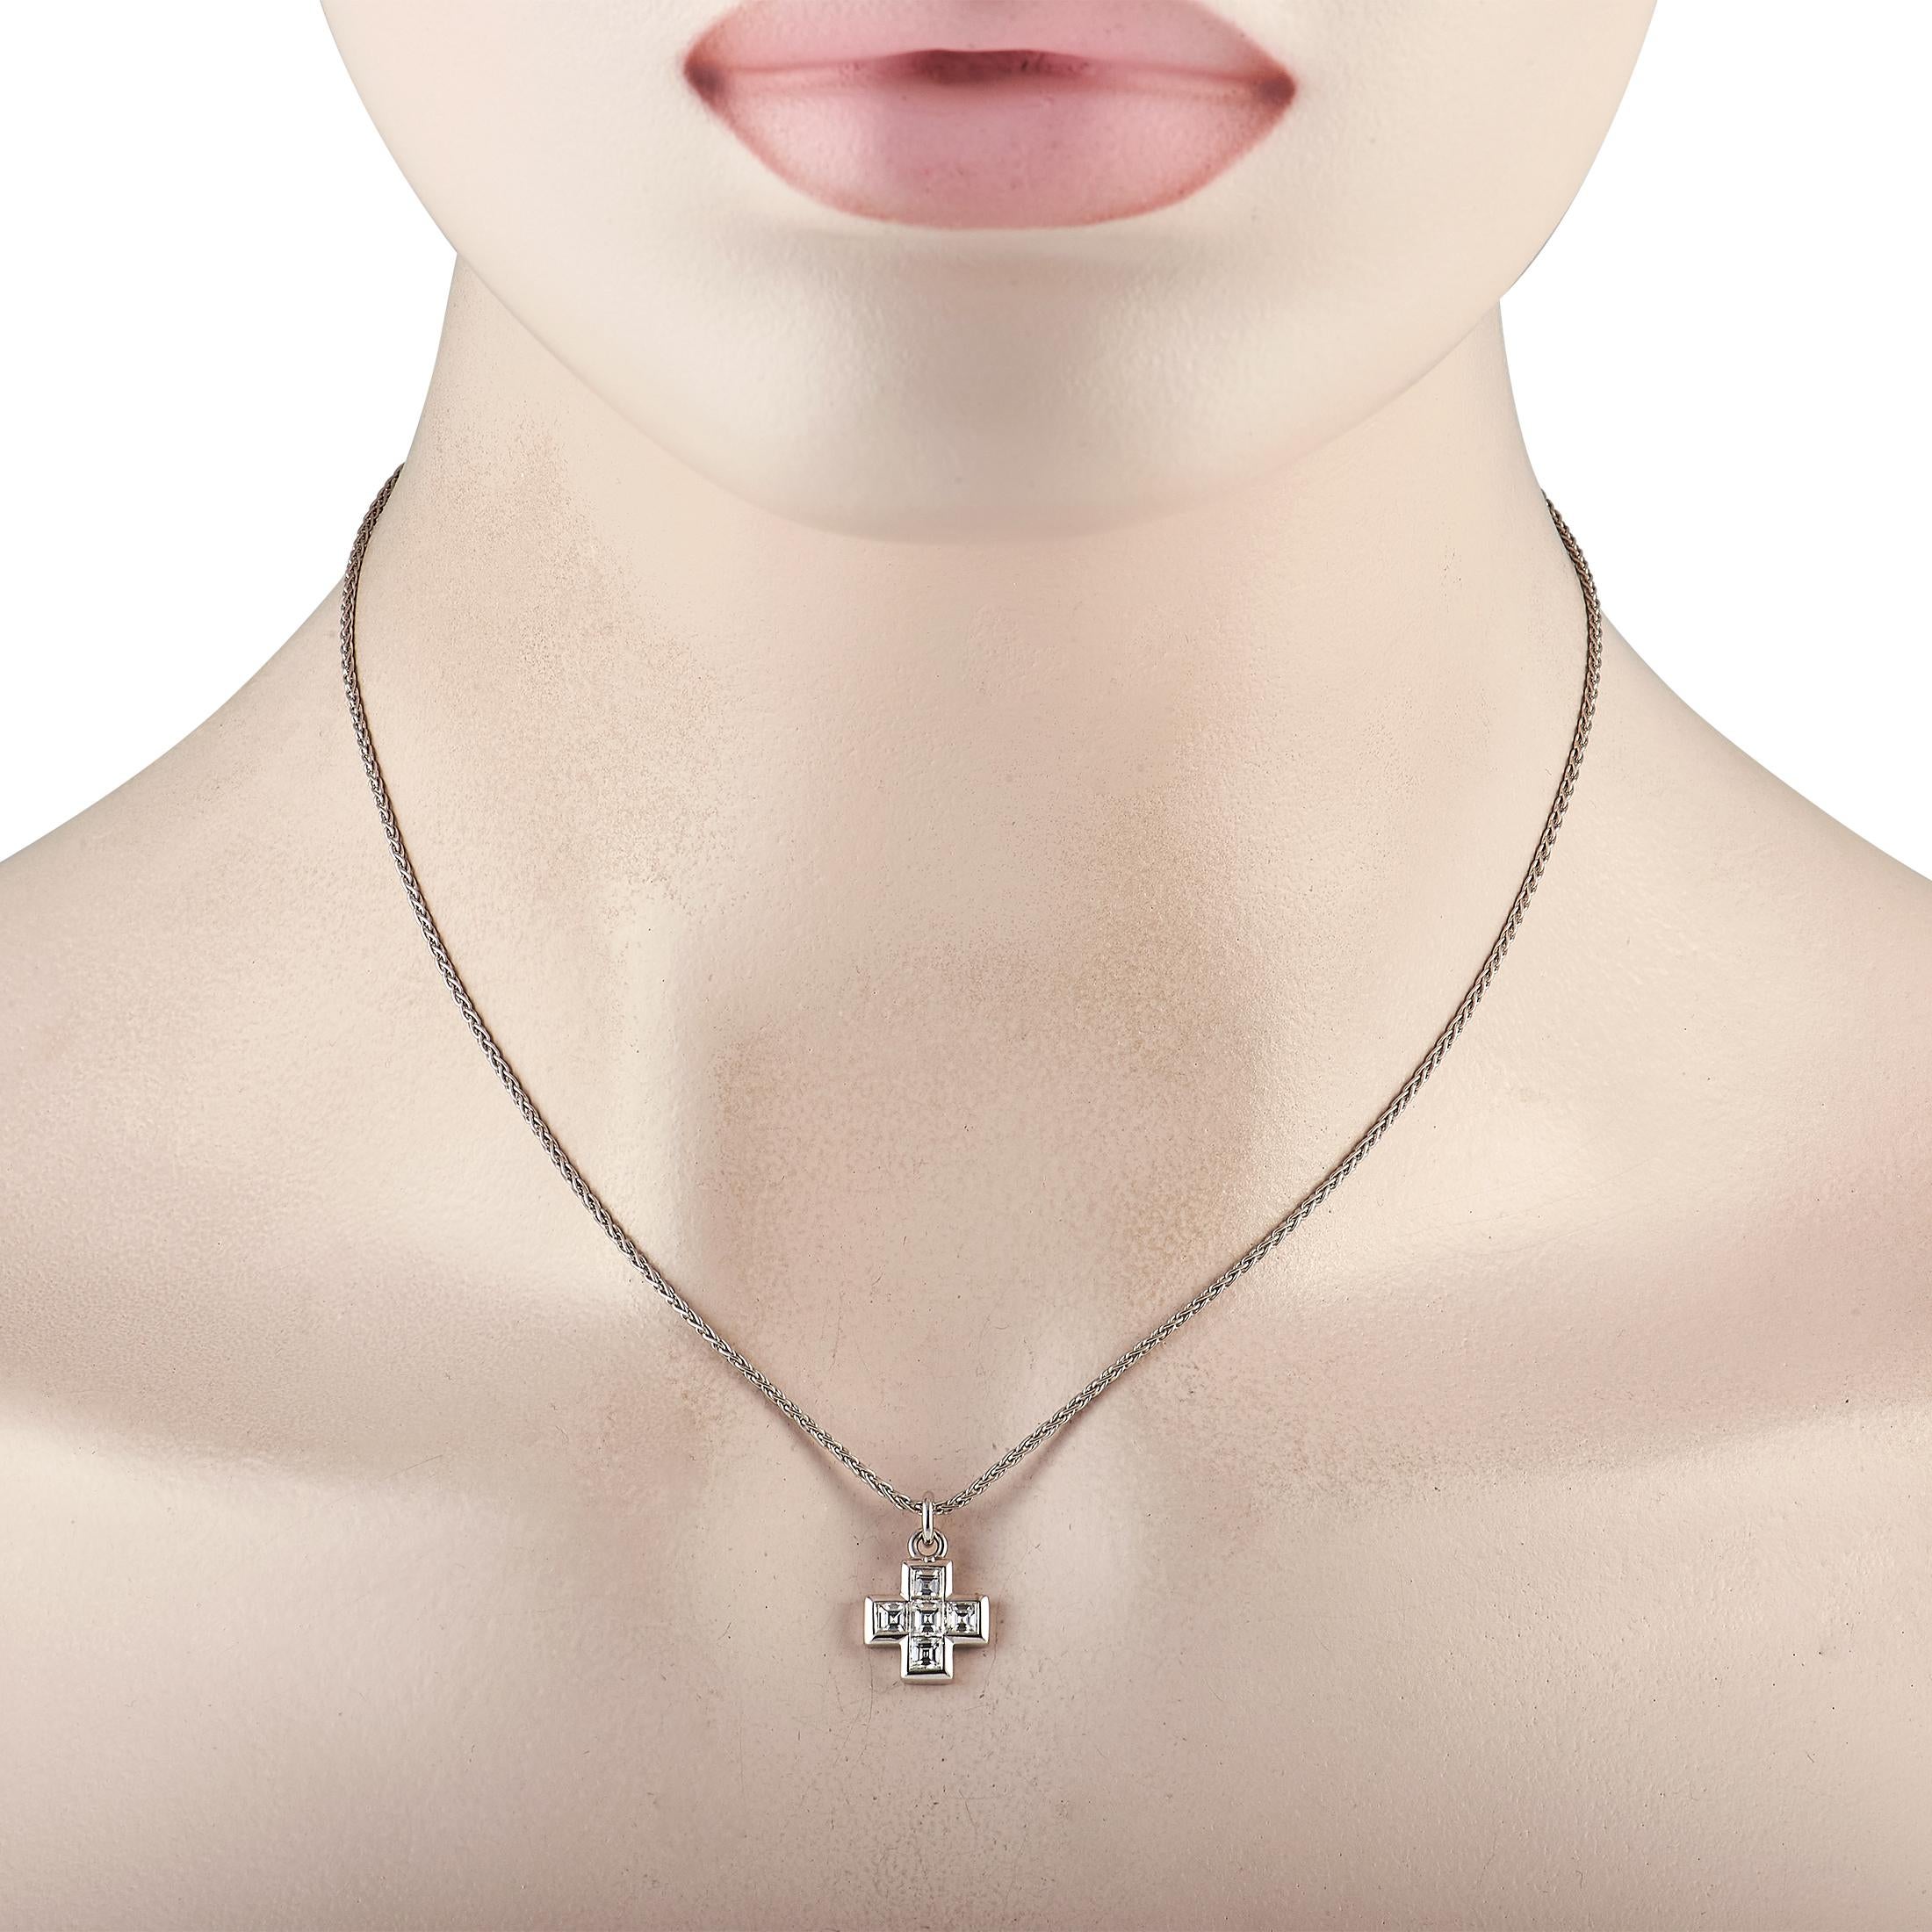 A sparkling symbol to celebrate and express your faith. This diamond necklace from Bvlgari features a modestly sized cross pendant measuring 0.65